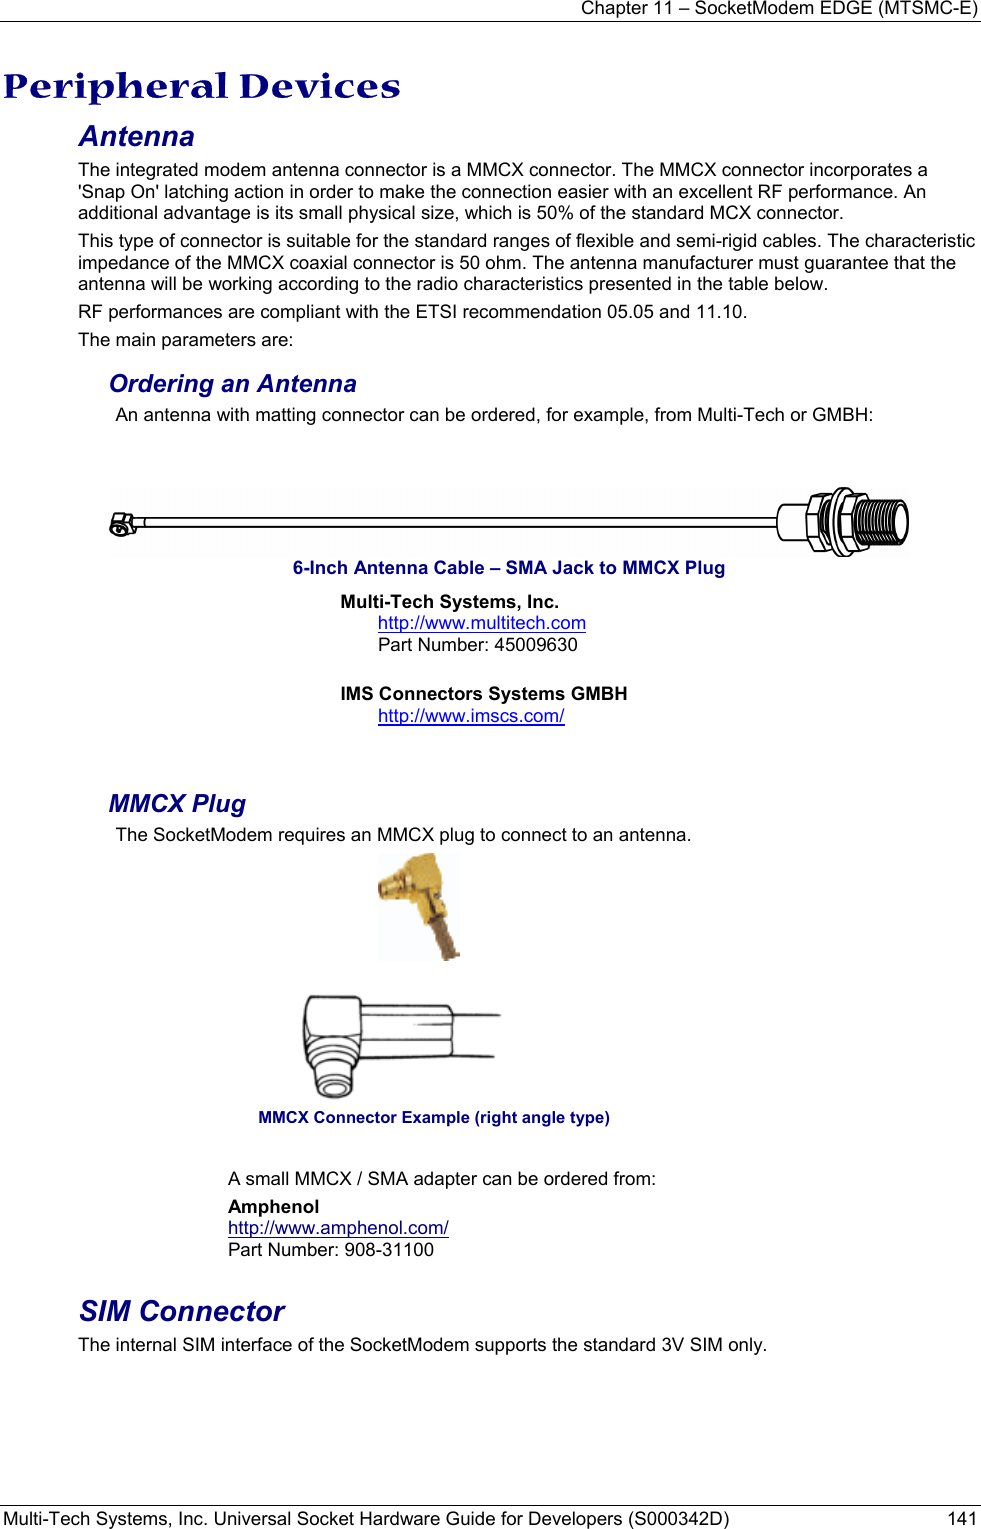 Chapter 11 – SocketModem EDGE (MTSMC-E) Multi-Tech Systems, Inc. Universal Socket Hardware Guide for Developers (S000342D)  141  Peripheral Devices Antenna  The integrated modem antenna connector is a MMCX connector. The MMCX connector incorporates a &apos;Snap On&apos; latching action in order to make the connection easier with an excellent RF performance. An additional advantage is its small physical size, which is 50% of the standard MCX connector. This type of connector is suitable for the standard ranges of flexible and semi-rigid cables. The characteristic impedance of the MMCX coaxial connector is 50 ohm. The antenna manufacturer must guarantee that the antenna will be working according to the radio characteristics presented in the table below. RF performances are compliant with the ETSI recommendation 05.05 and 11.10. The main parameters are: Ordering an Antenna An antenna with matting connector can be ordered, for example, from Multi-Tech or GMBH:    6-Inch Antenna Cable – SMA Jack to MMCX Plug Multi-Tech Systems, Inc. http://www.multitech.com Part Number: 45009630         IMS Connectors Systems GMBH http://www.imscs.com/   MMCX Plug  The SocketModem requires an MMCX plug to connect to an antenna.                                                    MMCX Connector Example (right angle type)  A small MMCX / SMA adapter can be ordered from: Amphenol  http://www.amphenol.com/ Part Number: 908-31100  SIM Connector The internal SIM interface of the SocketModem supports the standard 3V SIM only.       